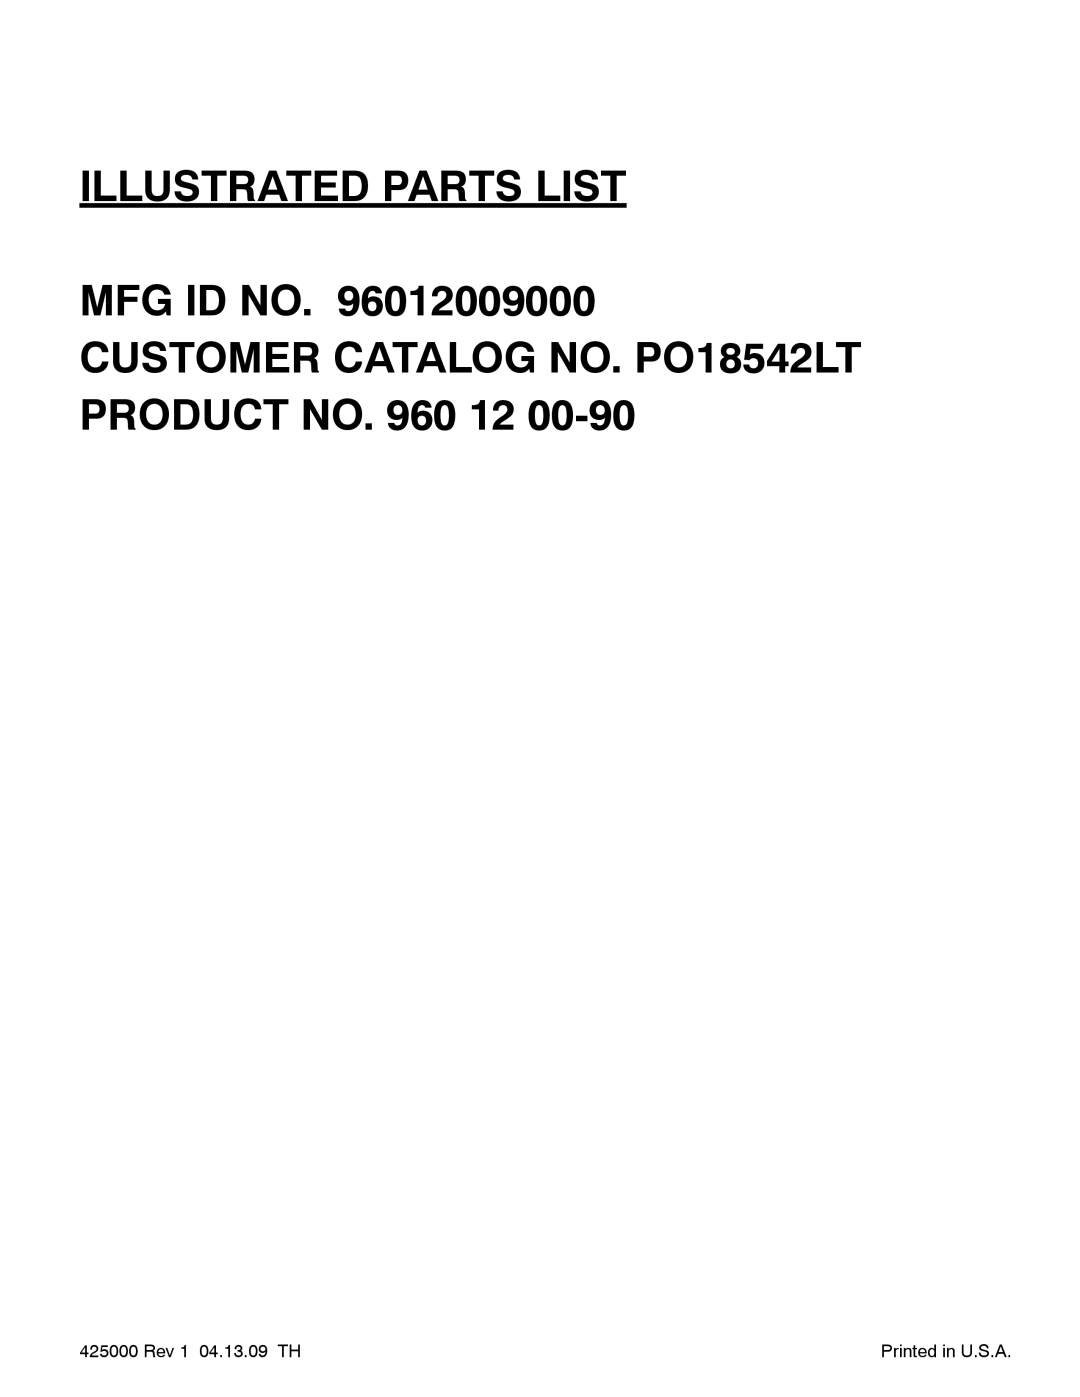 Poulan 960 12 00-90 manual Illustrated Parts List, Rev 1 04.13.09 TH, Printed in U.S.A 